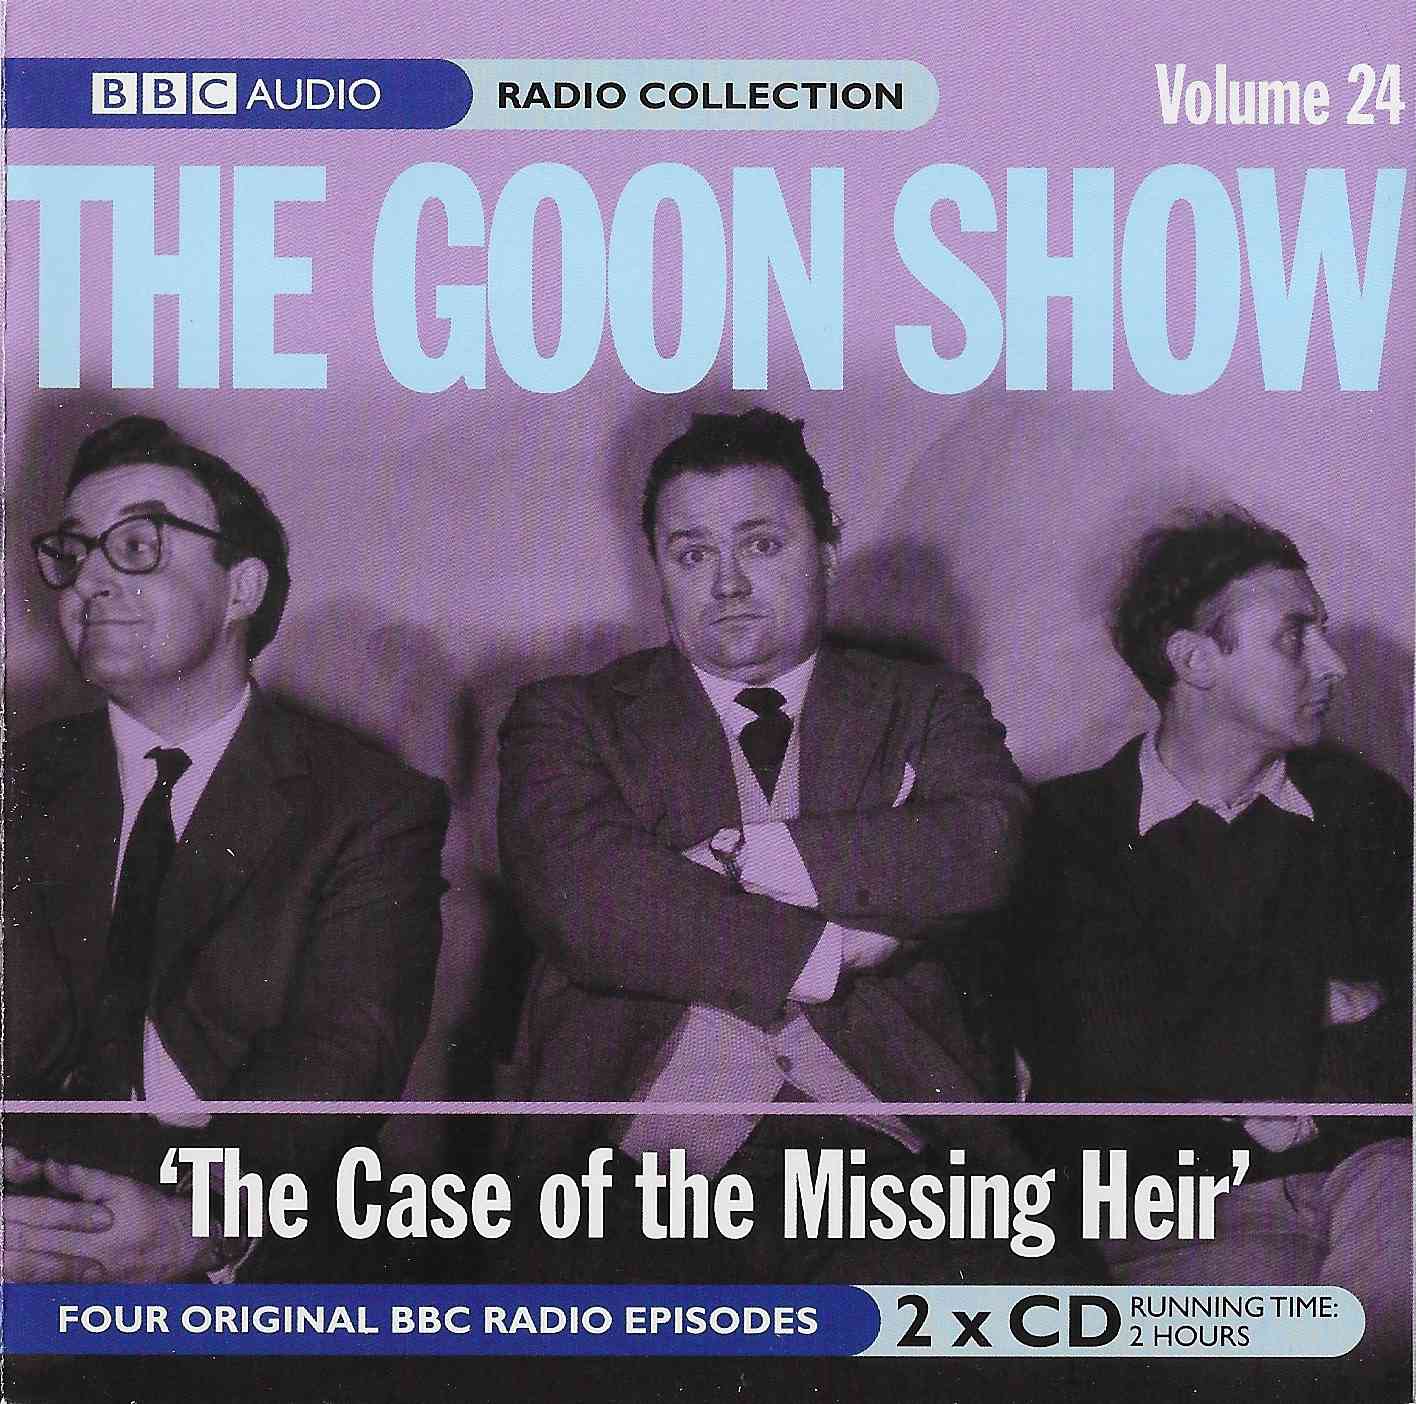 Picture of ISBN 1-8460-7194-1 The Goon Show 24 - The case of the missing heir by artist Spike Milligan / Eric Sykes from the BBC cds - Records and Tapes library